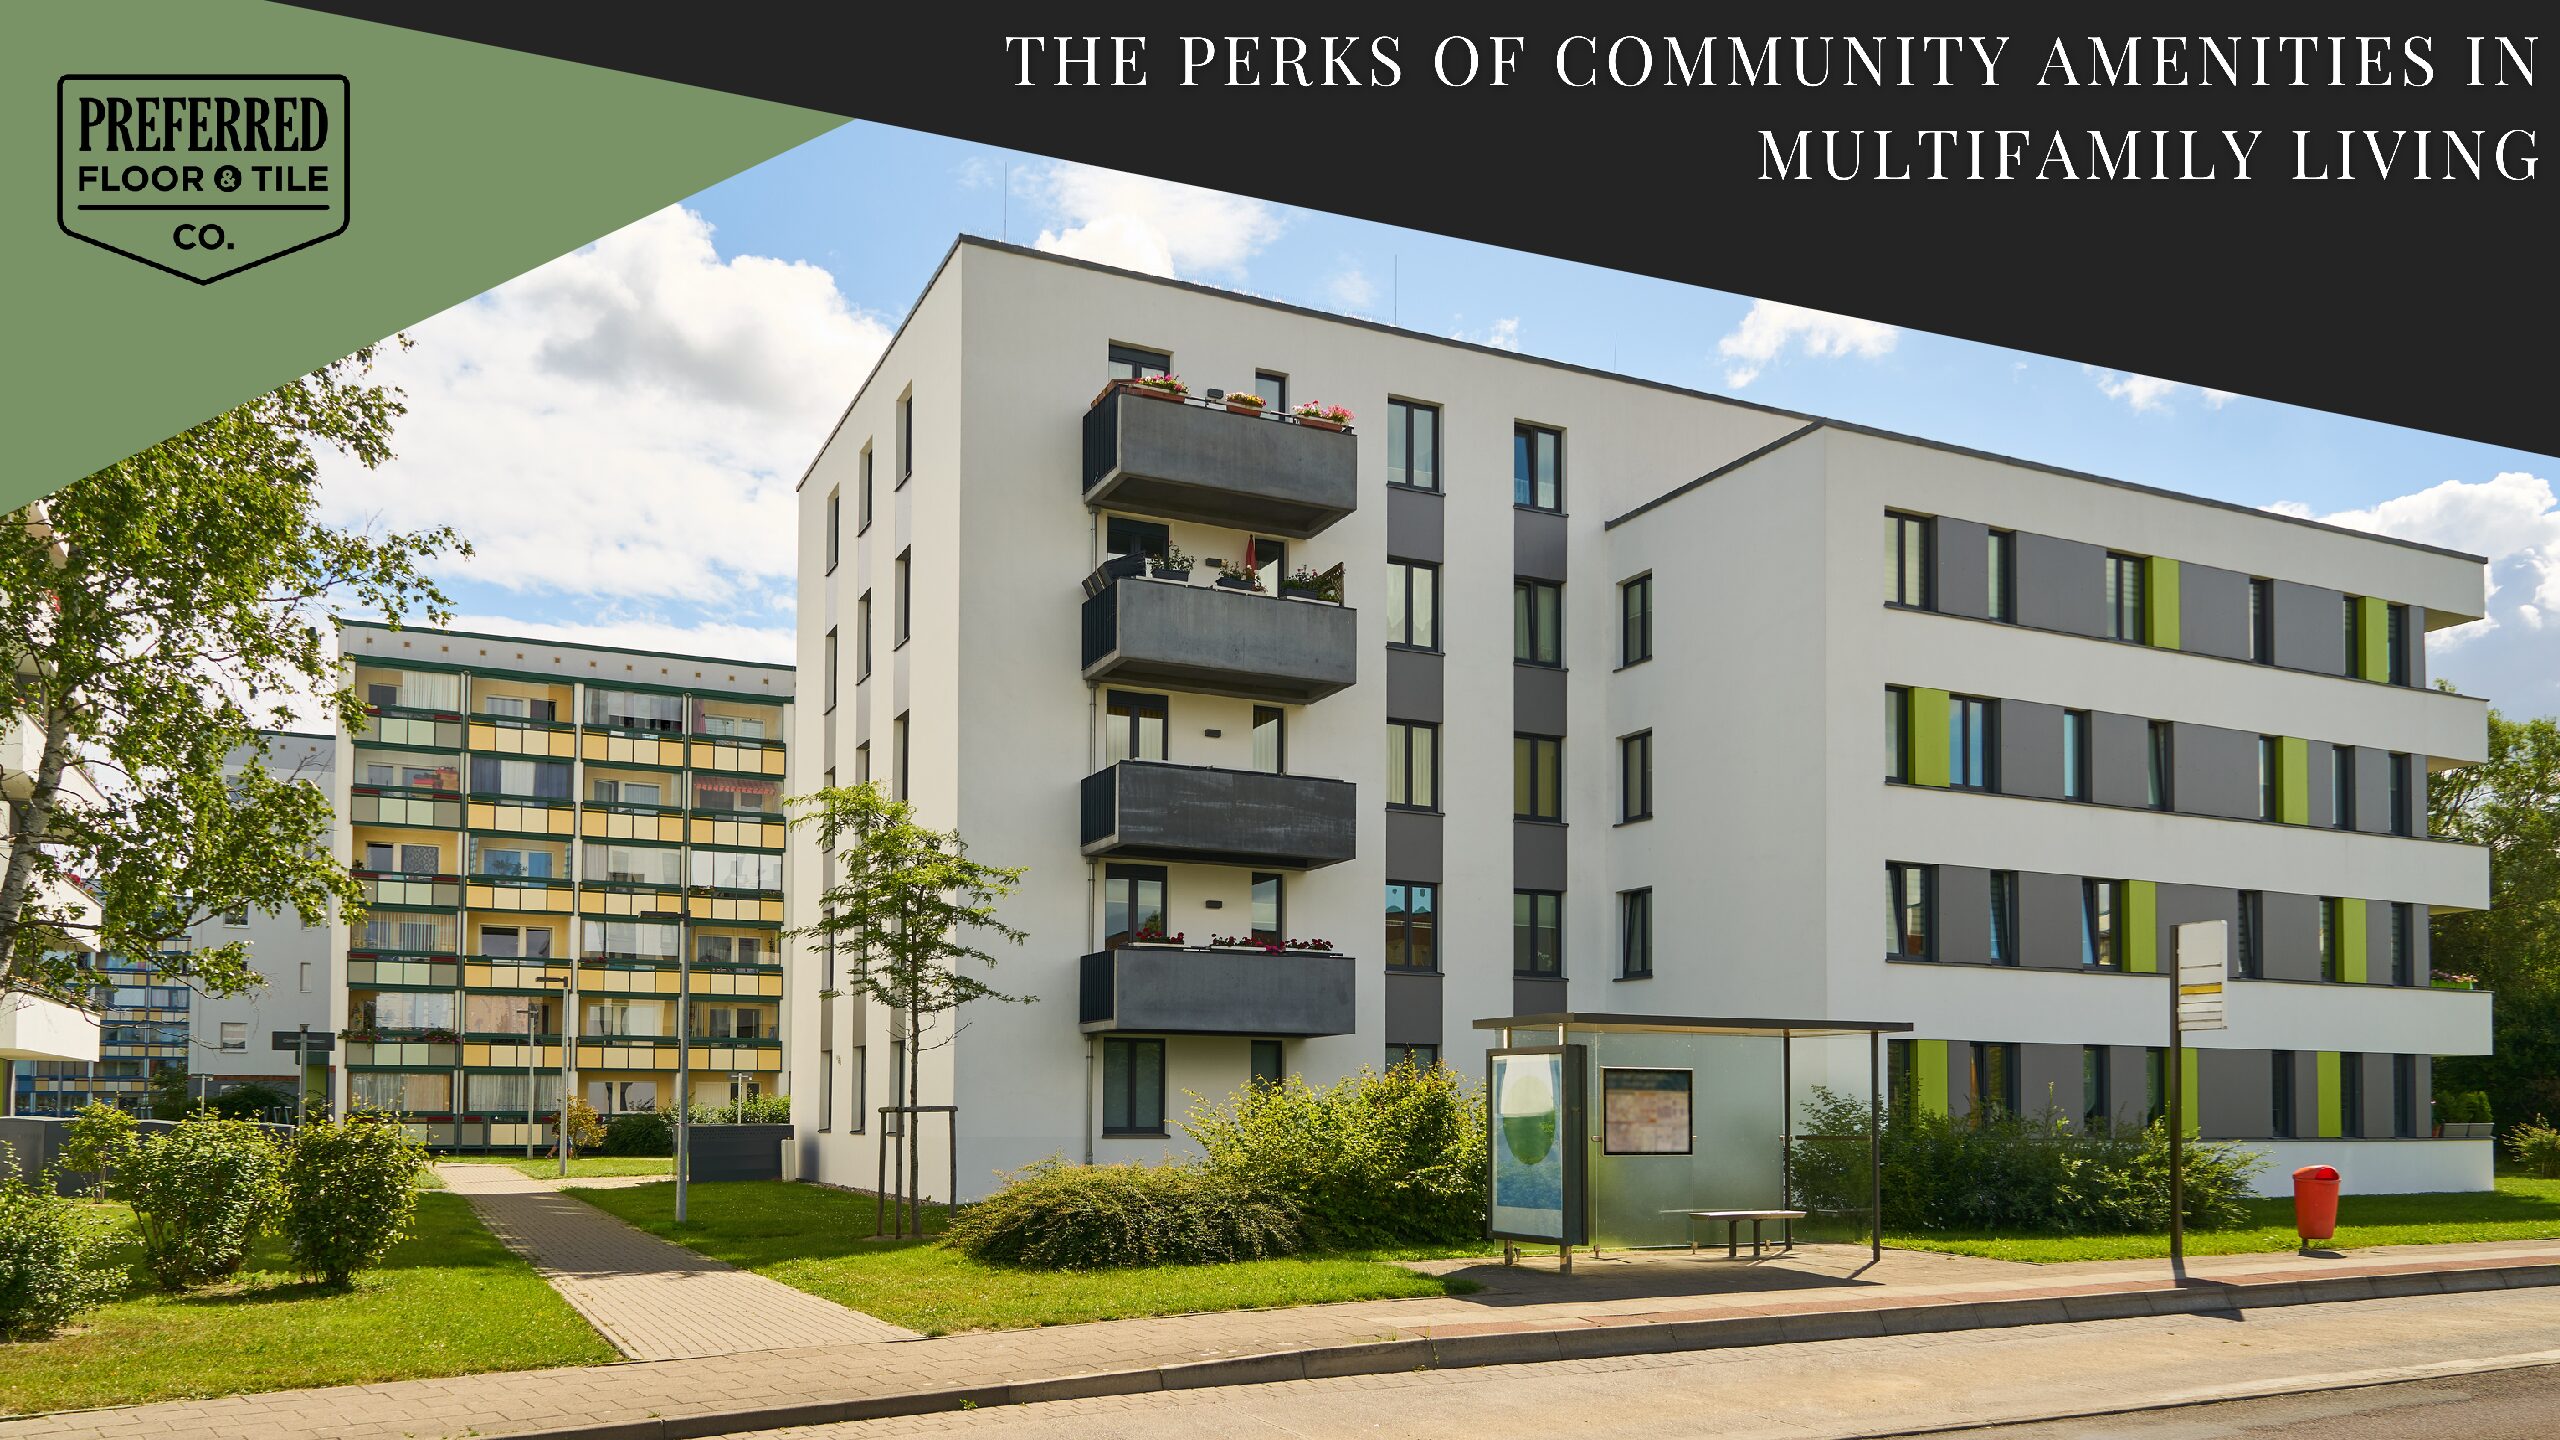 The Perks of Community Amenities in Multifamily Living